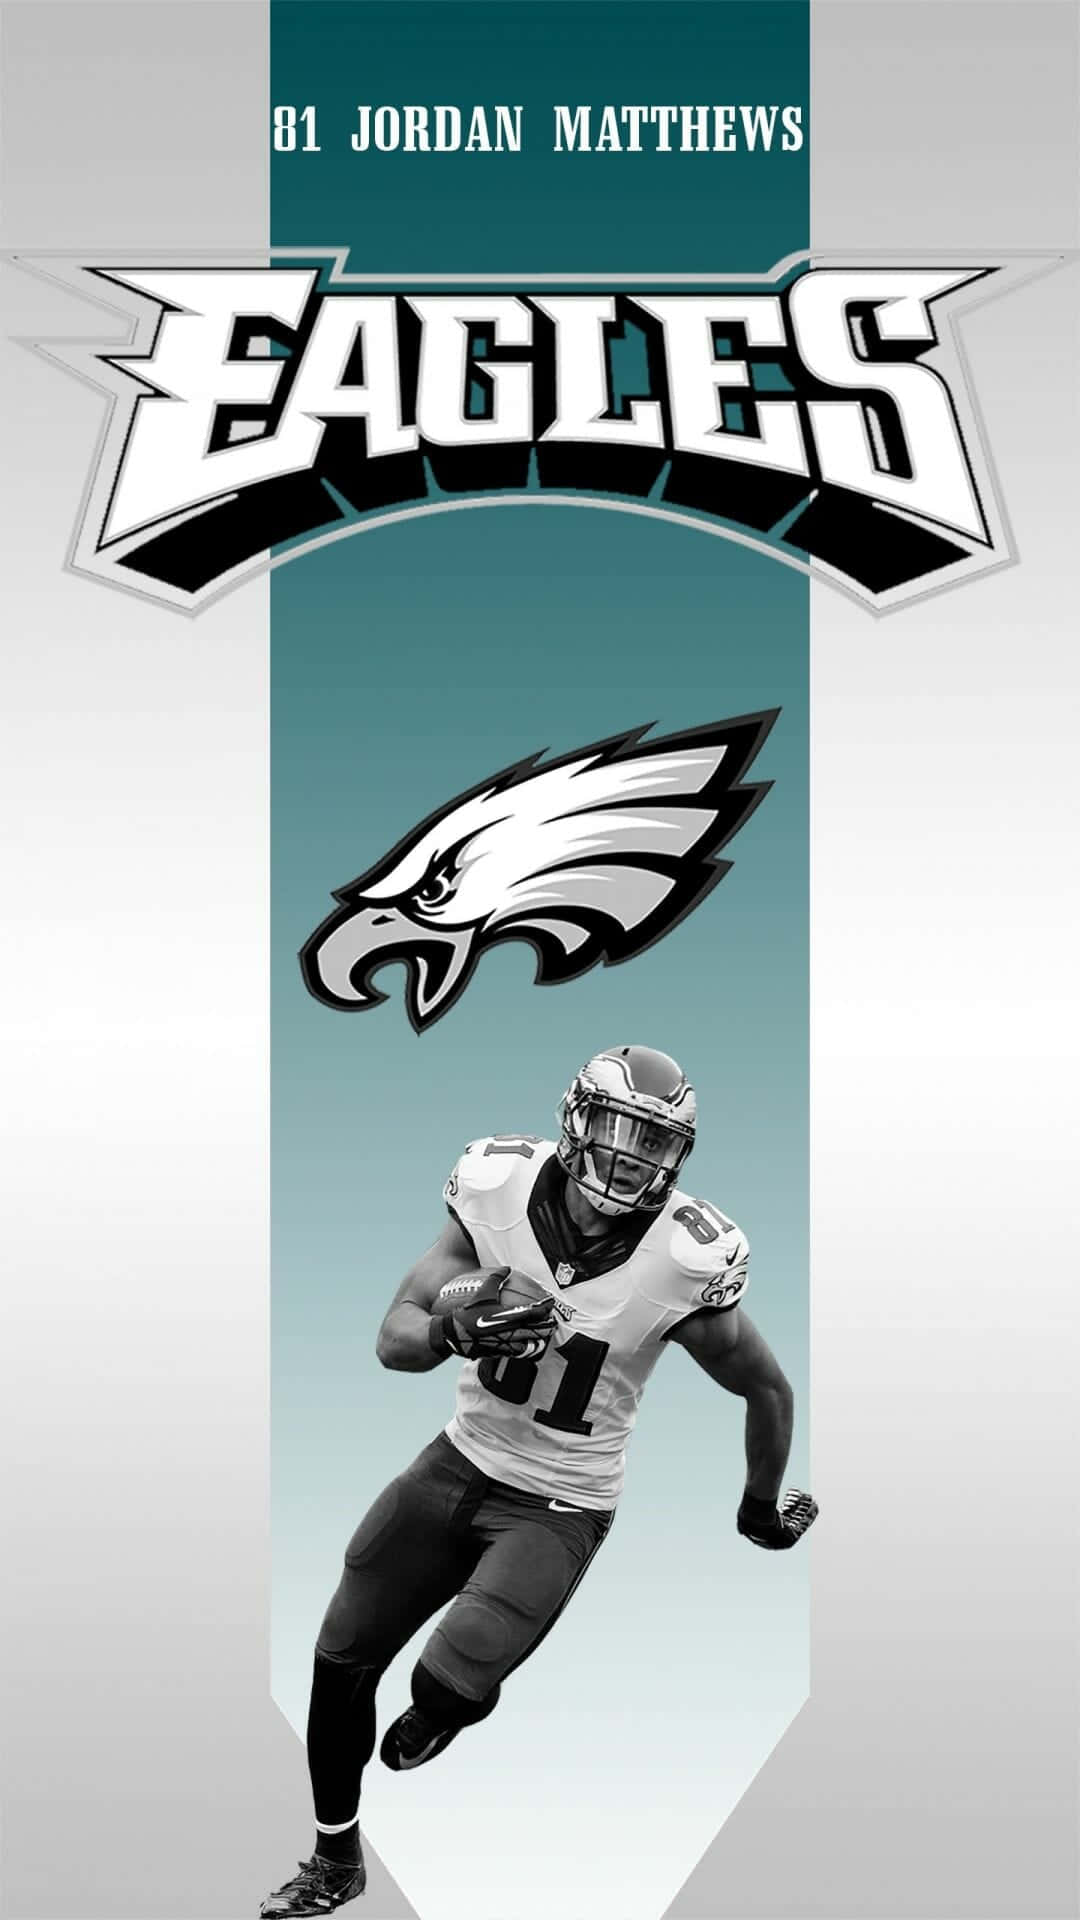 Get geared up with the official Philadelphia Eagles iPhone! Wallpaper